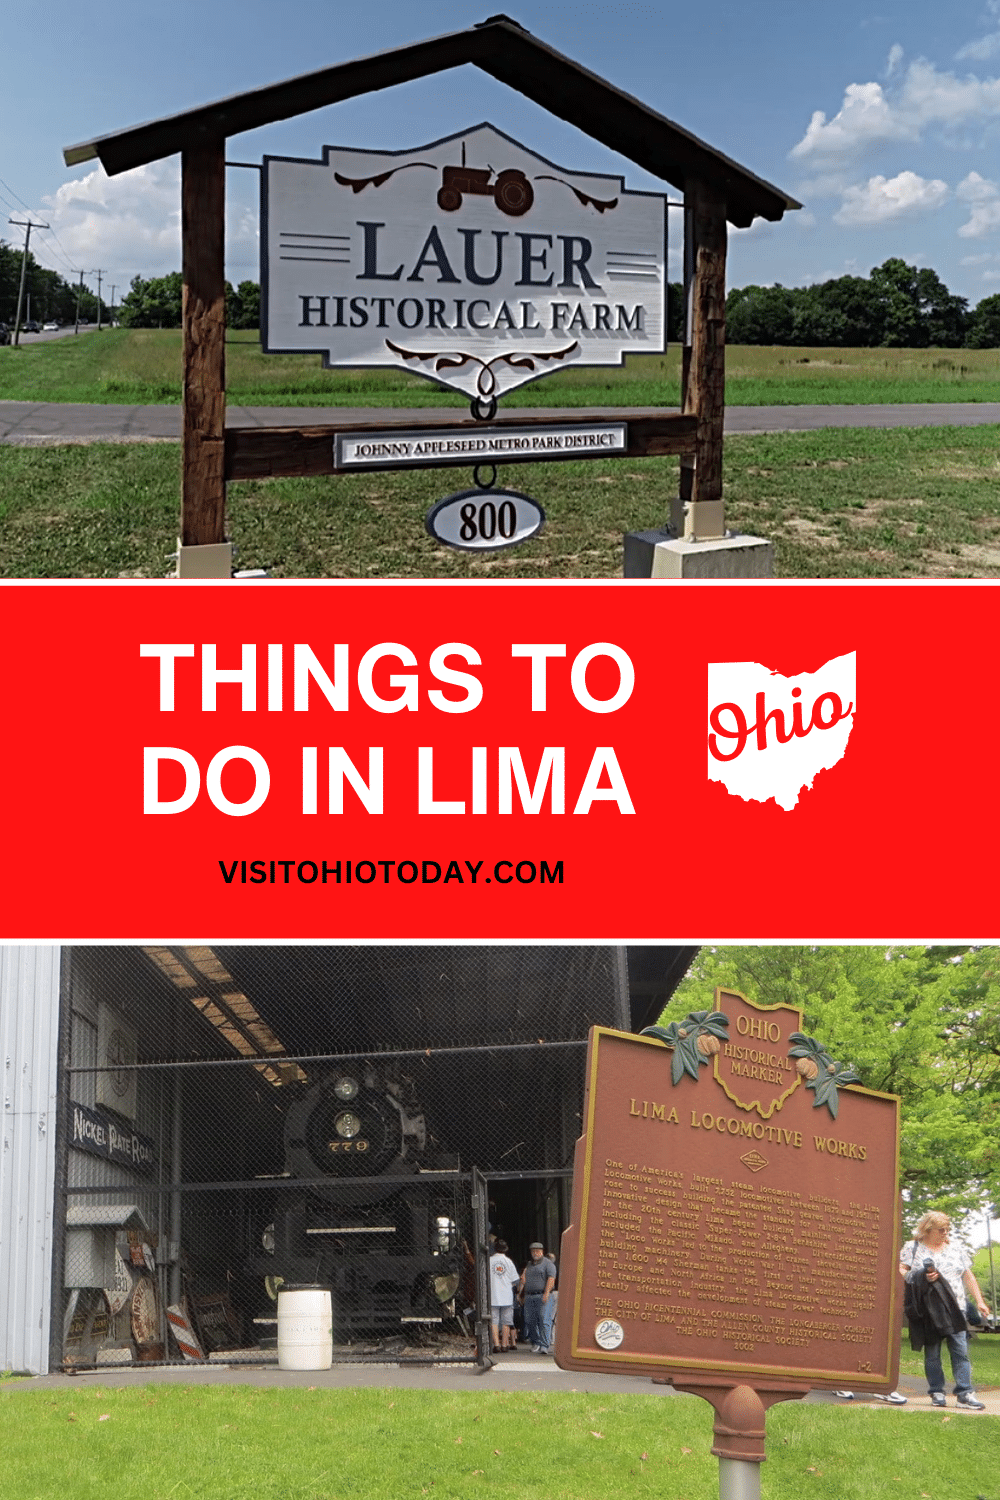 vertical image with a photo of the entrance sign of Lauer Historical Farm and a photo of the Lima Locamotive Works. A red strip across the center contains the text Things to Do in Lima